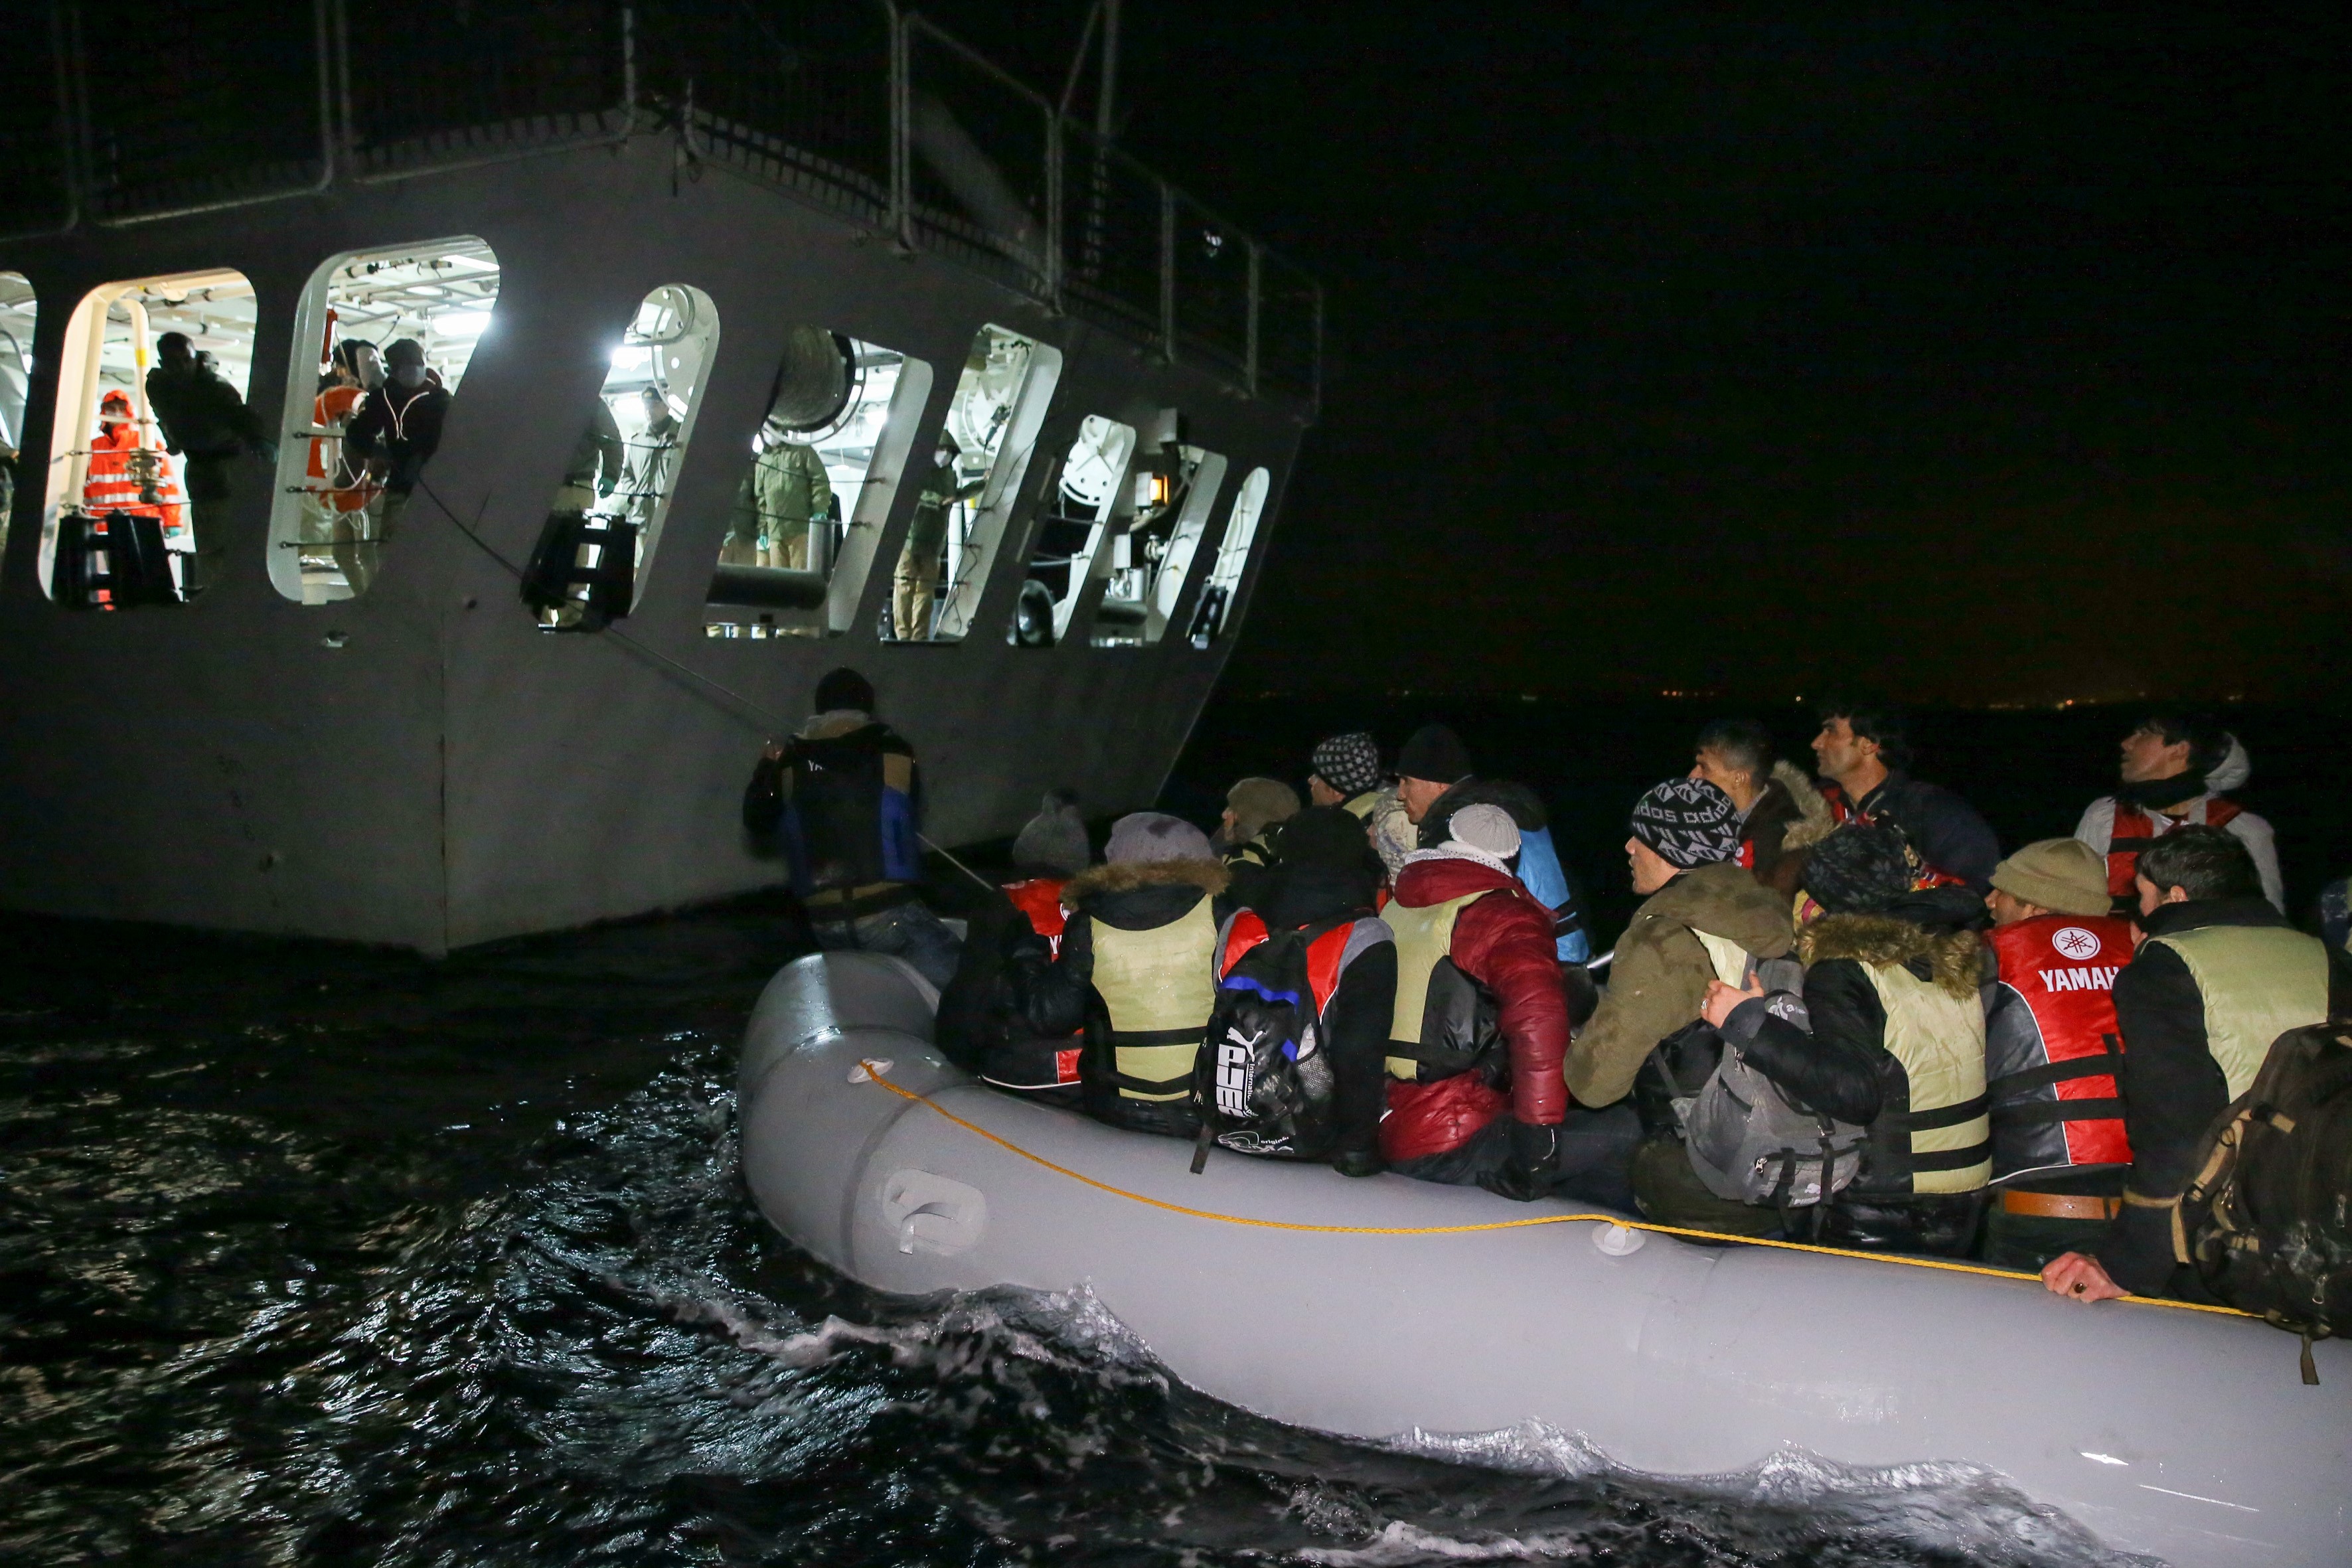 Turkish coast guards pull a refugee boat into a Turkish Coast Guard ship during a rescue operation for the asylum seeker refugees who were illegally trying to reach Greece through the Aegean Sea with a overloaded inflatable boat, on the shores of Turkey's Izmir Province's Cesme District on Jan. 21, 2016.